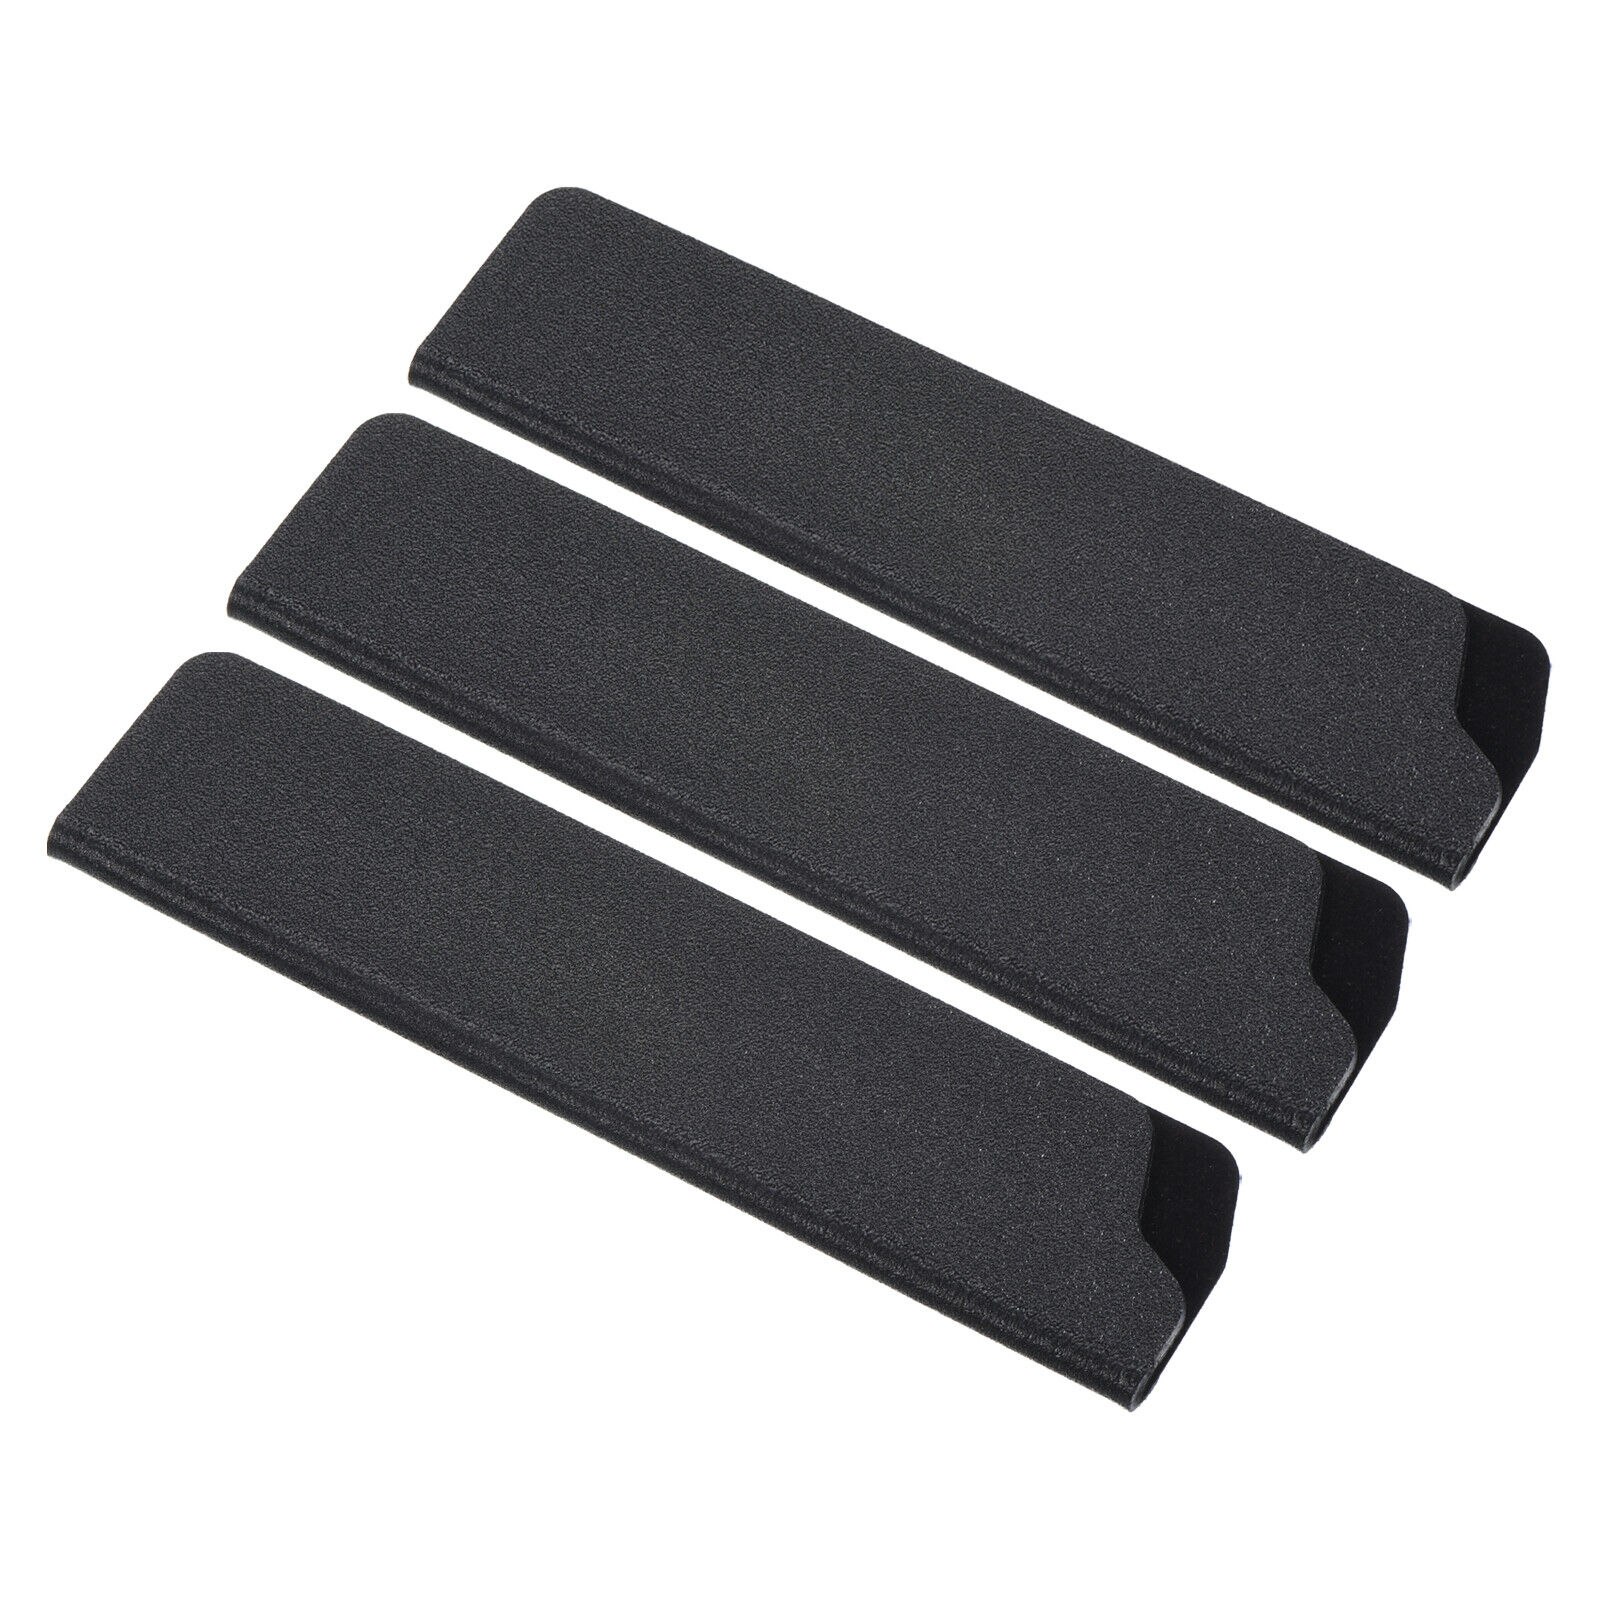 3pcs ABS Knife Cover Sleeves Guard Blade Protector for 5\